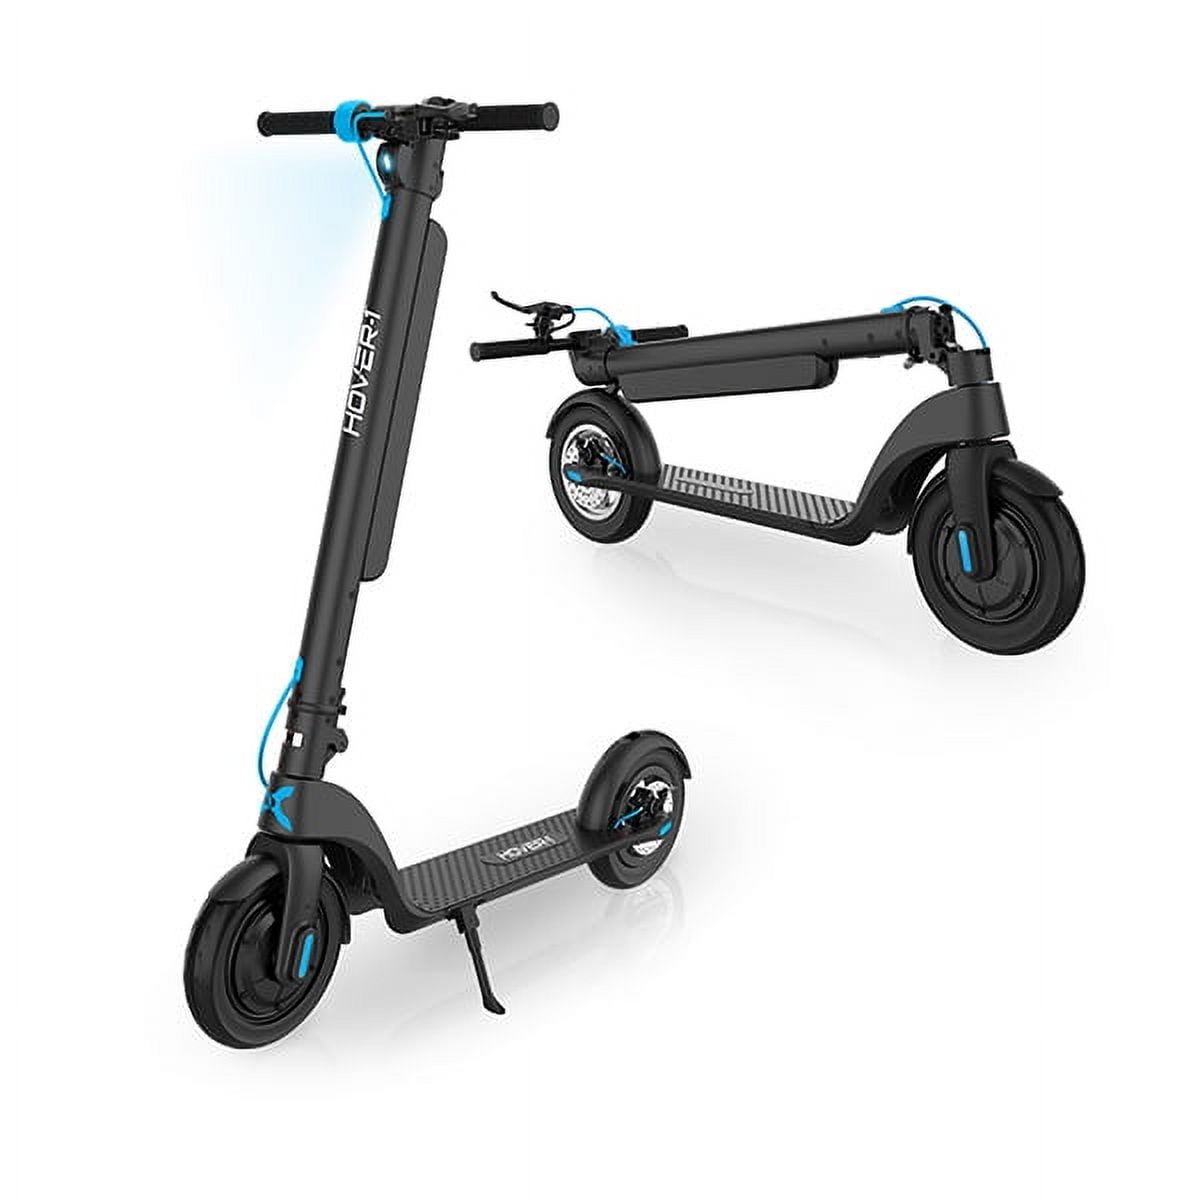 Hover-1 Blackhawk Electric Scooter Review: Get the Inside Scoop!